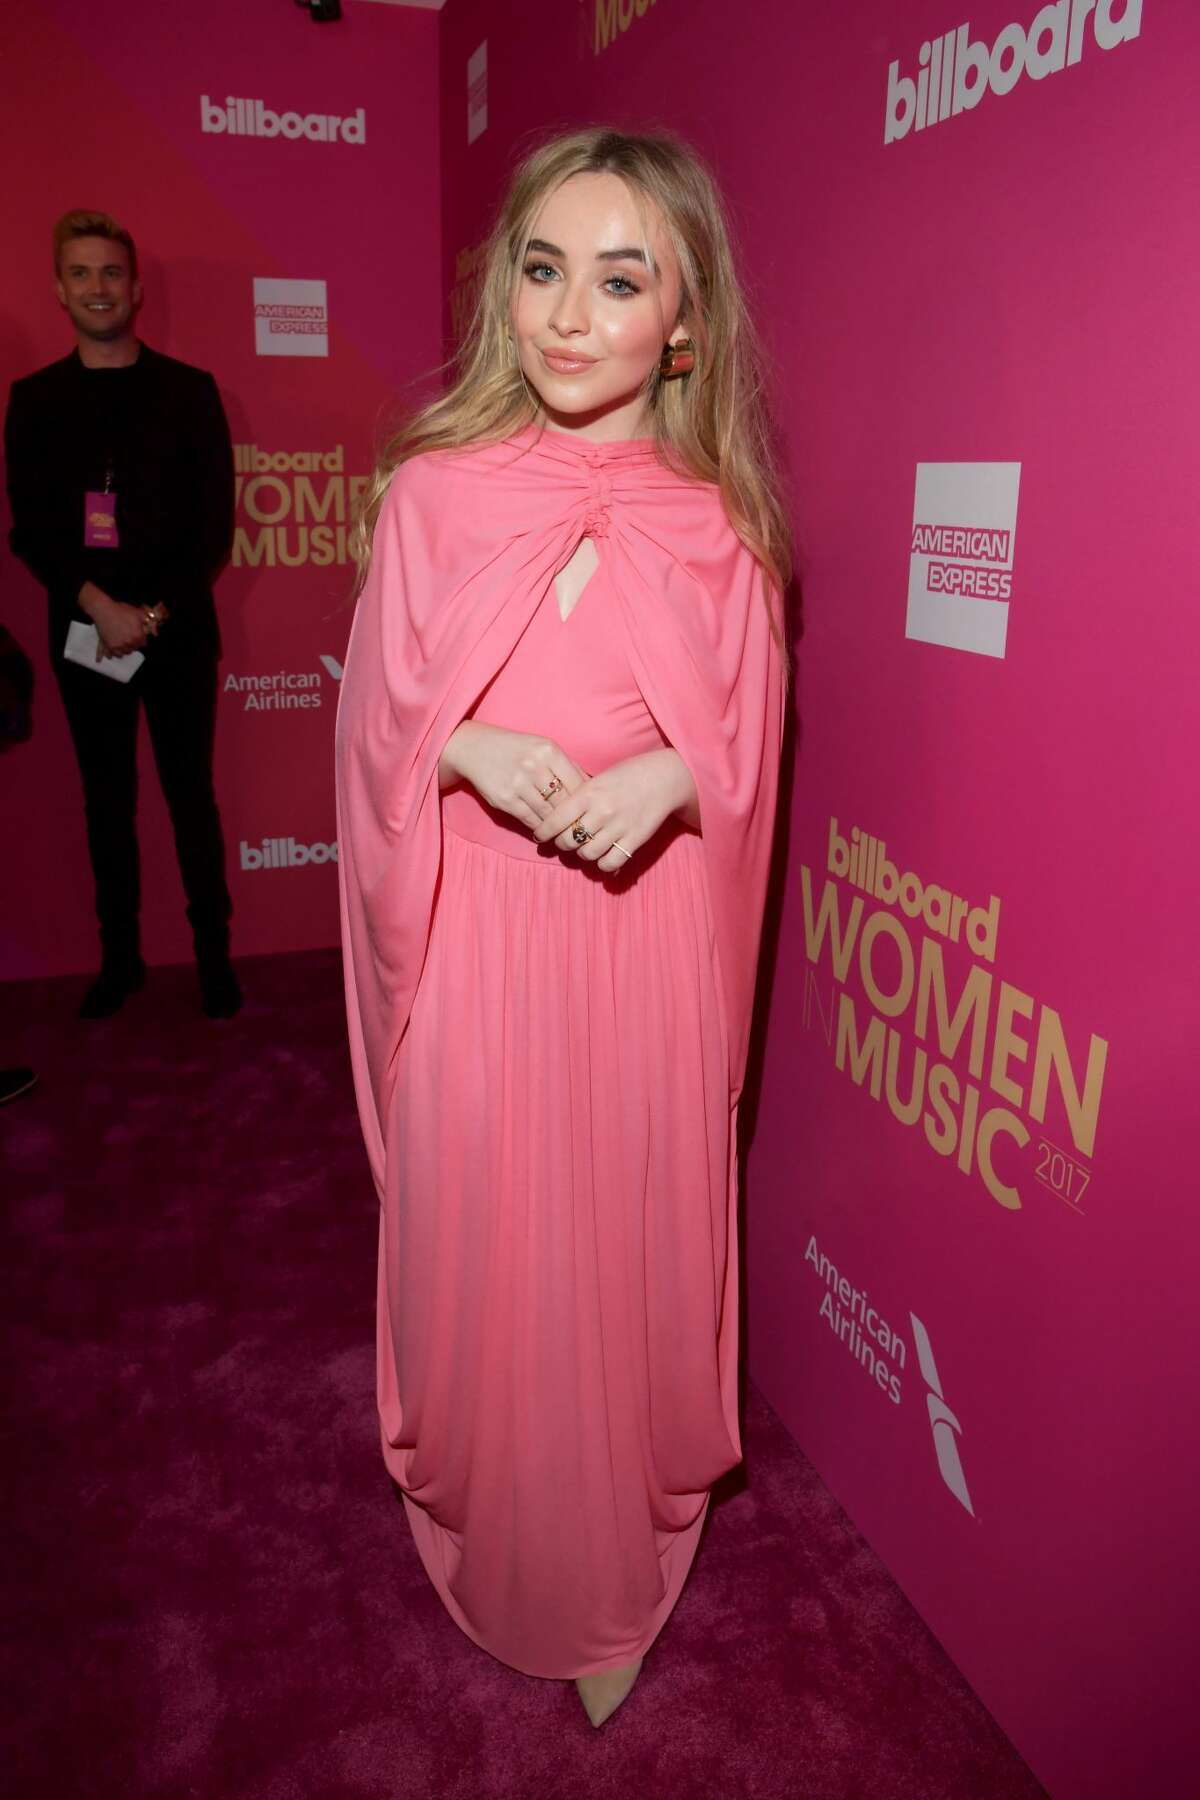 Worst: Sabrina Carpenter looks like the Bubble Tape inside of its pink plastic container. 